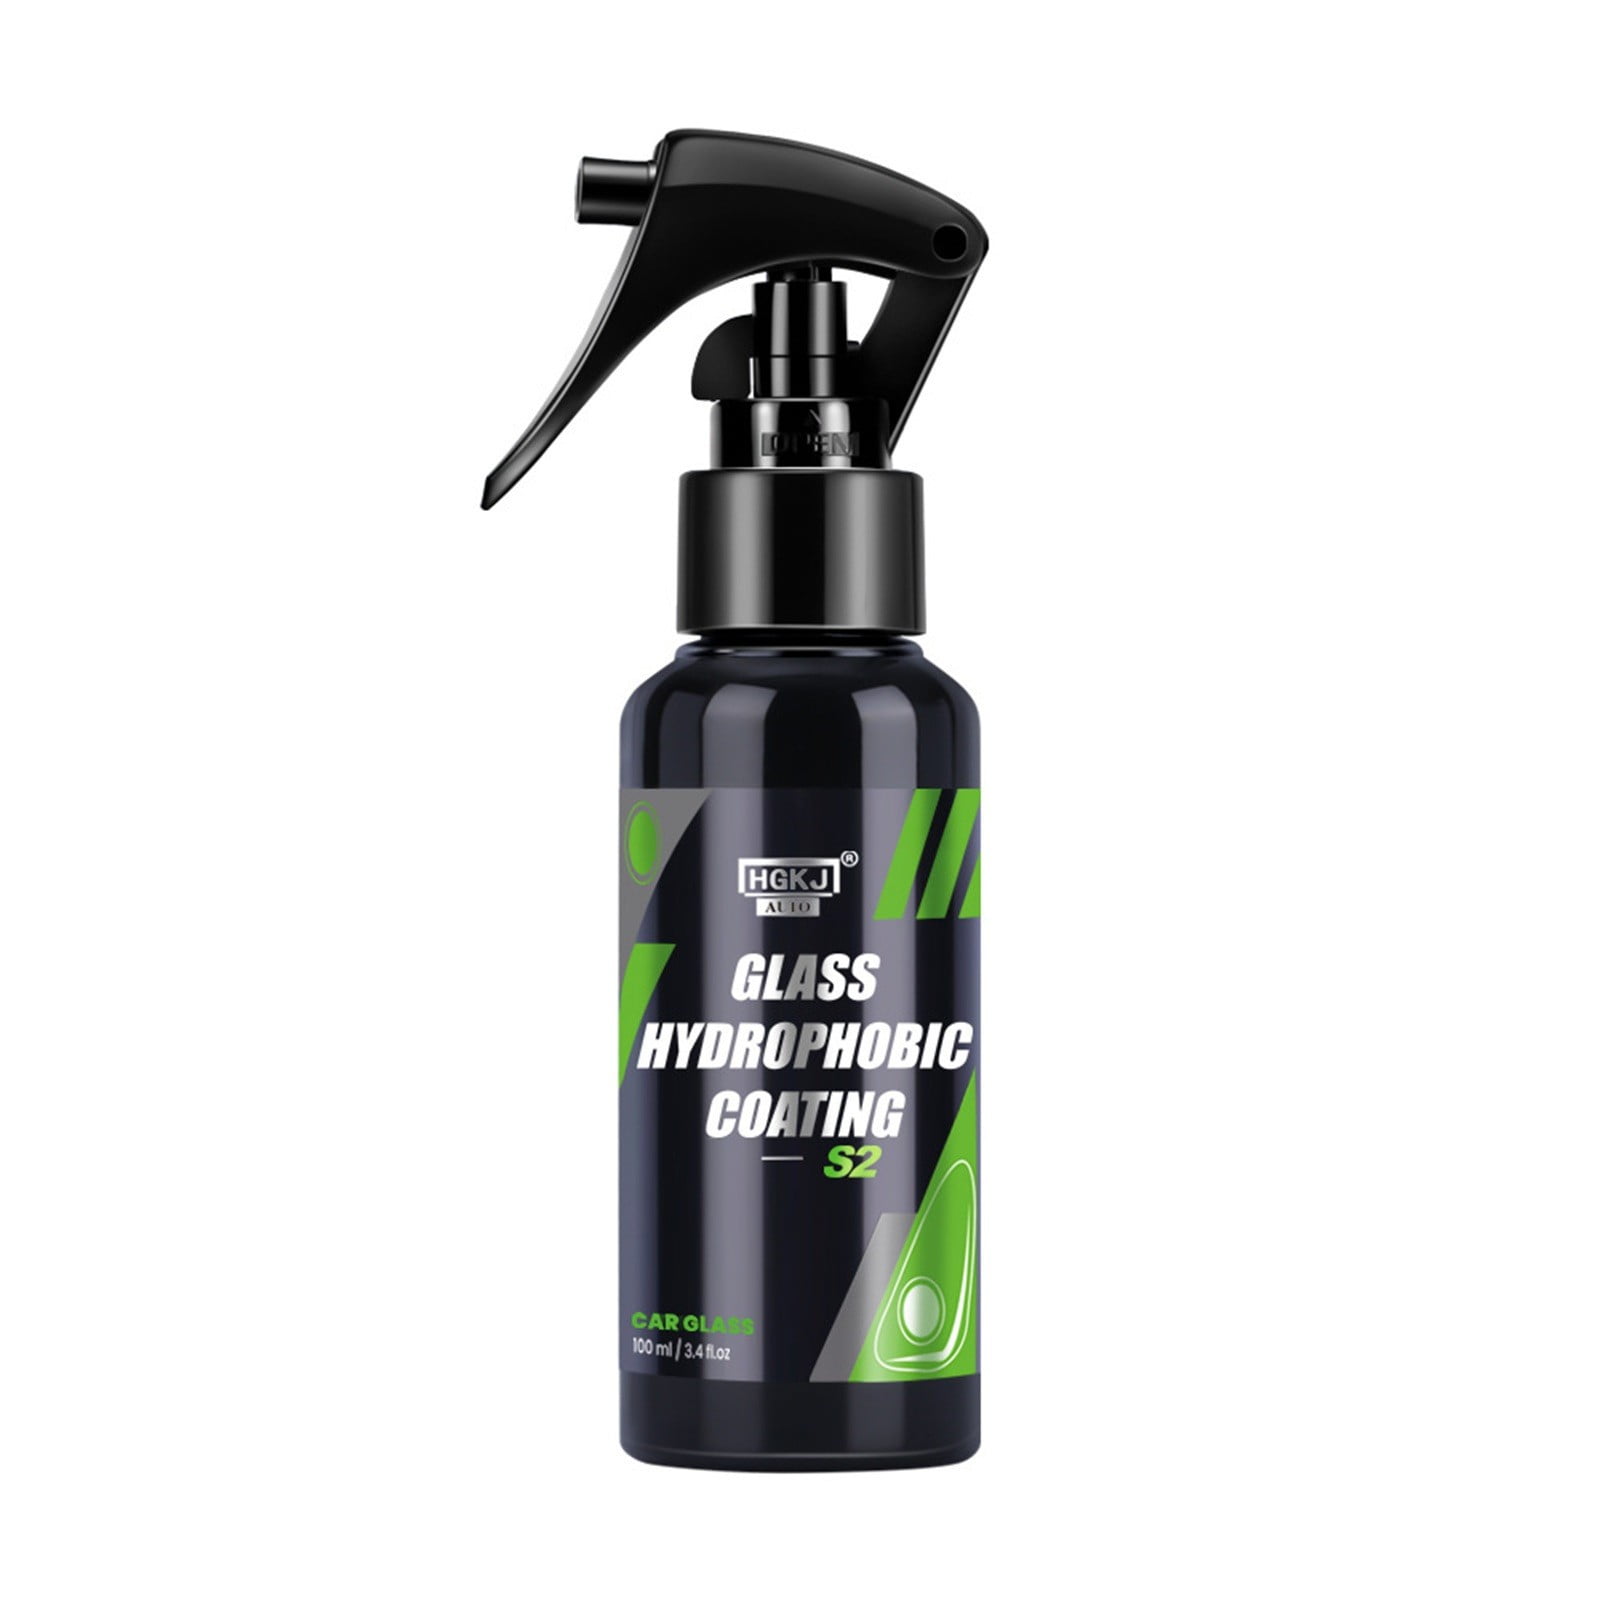  Glass Ceramic Coating-Windshield Glass Coat Kit,Professional  Grade Glass Protect Kit,Self Cleaning,Rain Shower Water Repellent,  Increased Visibility,Resistant to Chemical and UV Damage : Automotive